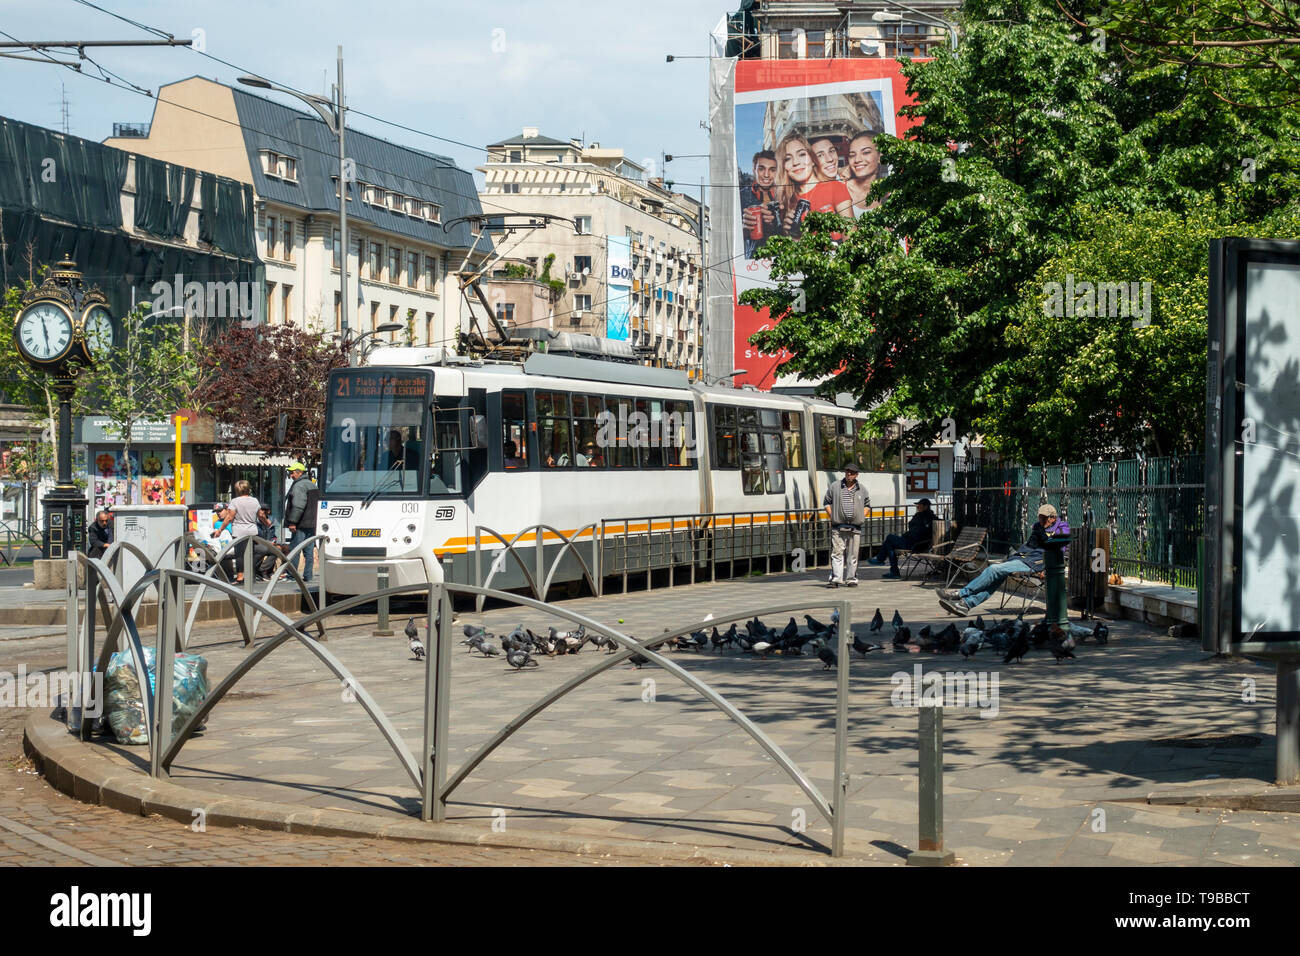 A three-section tram, route 21, in Piata Sf Georghe (St George Square) in the Old Town area of central Bucharest, Romania, where pigeons are drinking  Stock Photo